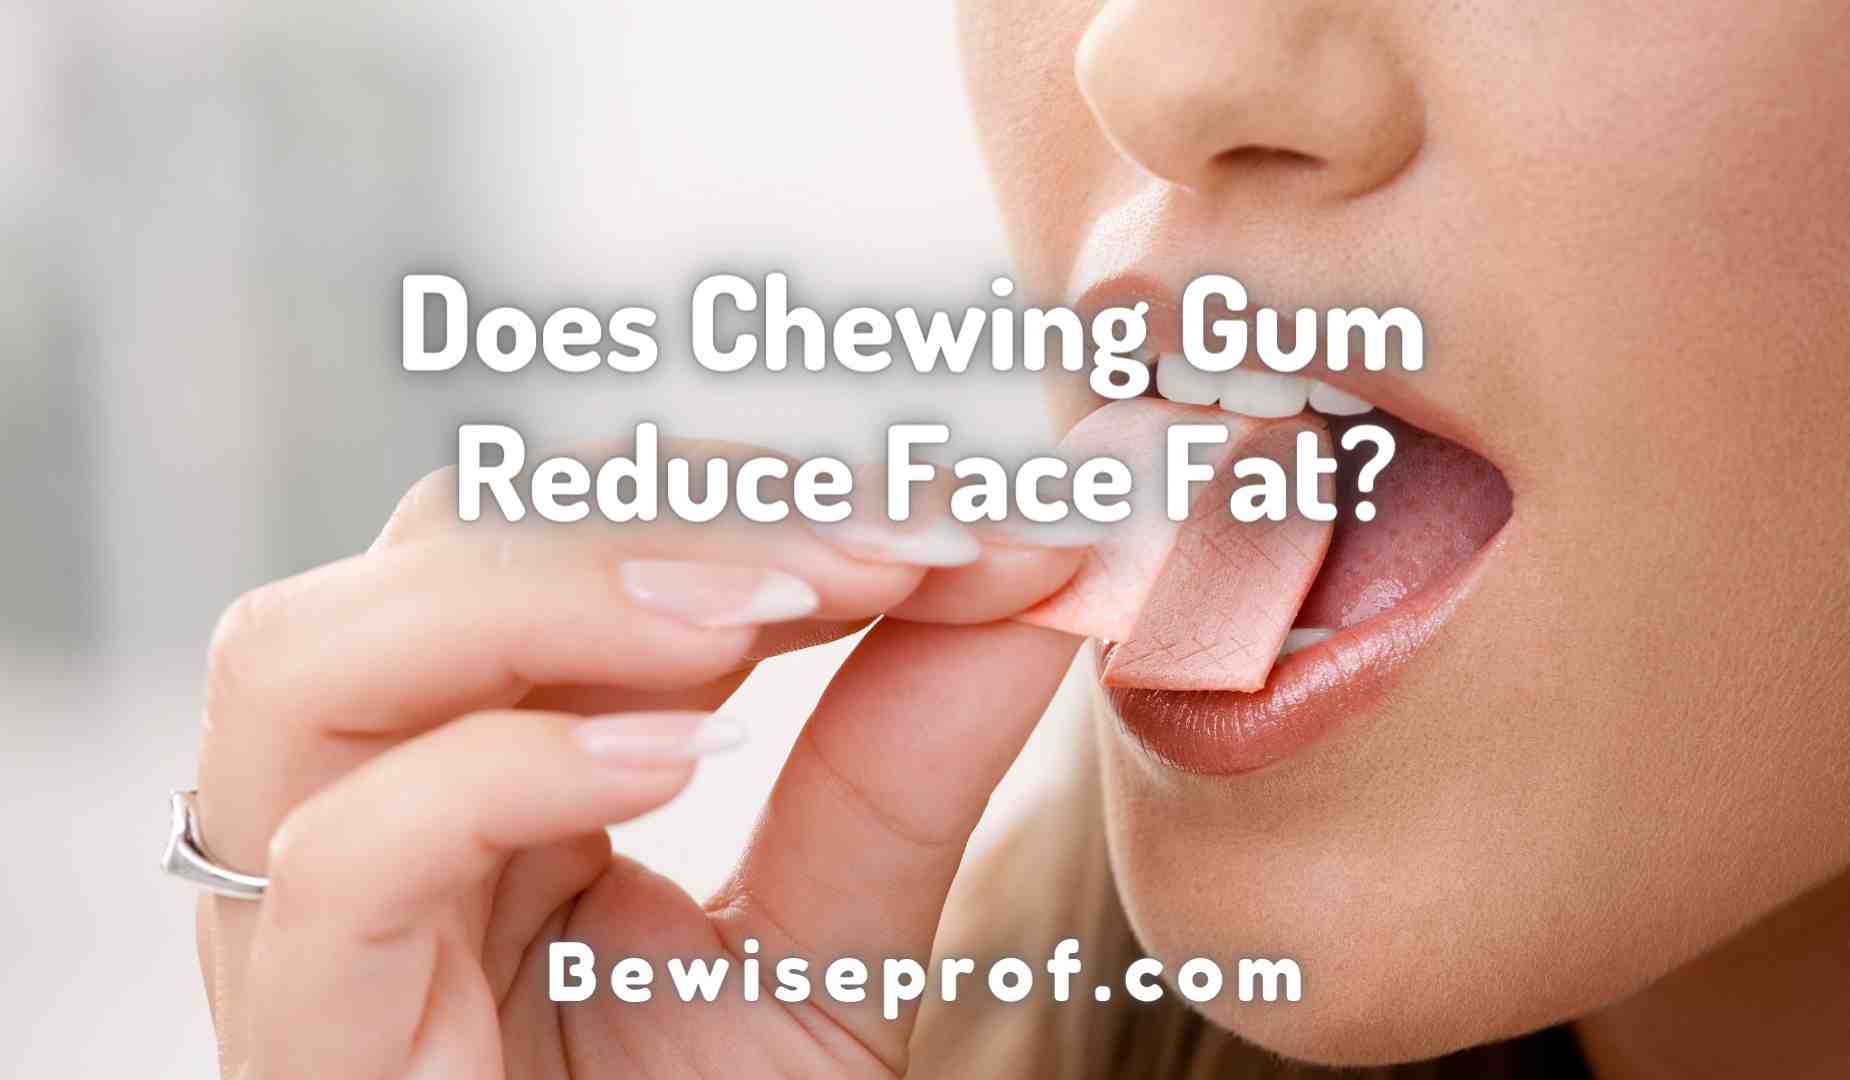 Does Chewing Gum Reduce Face Fat?